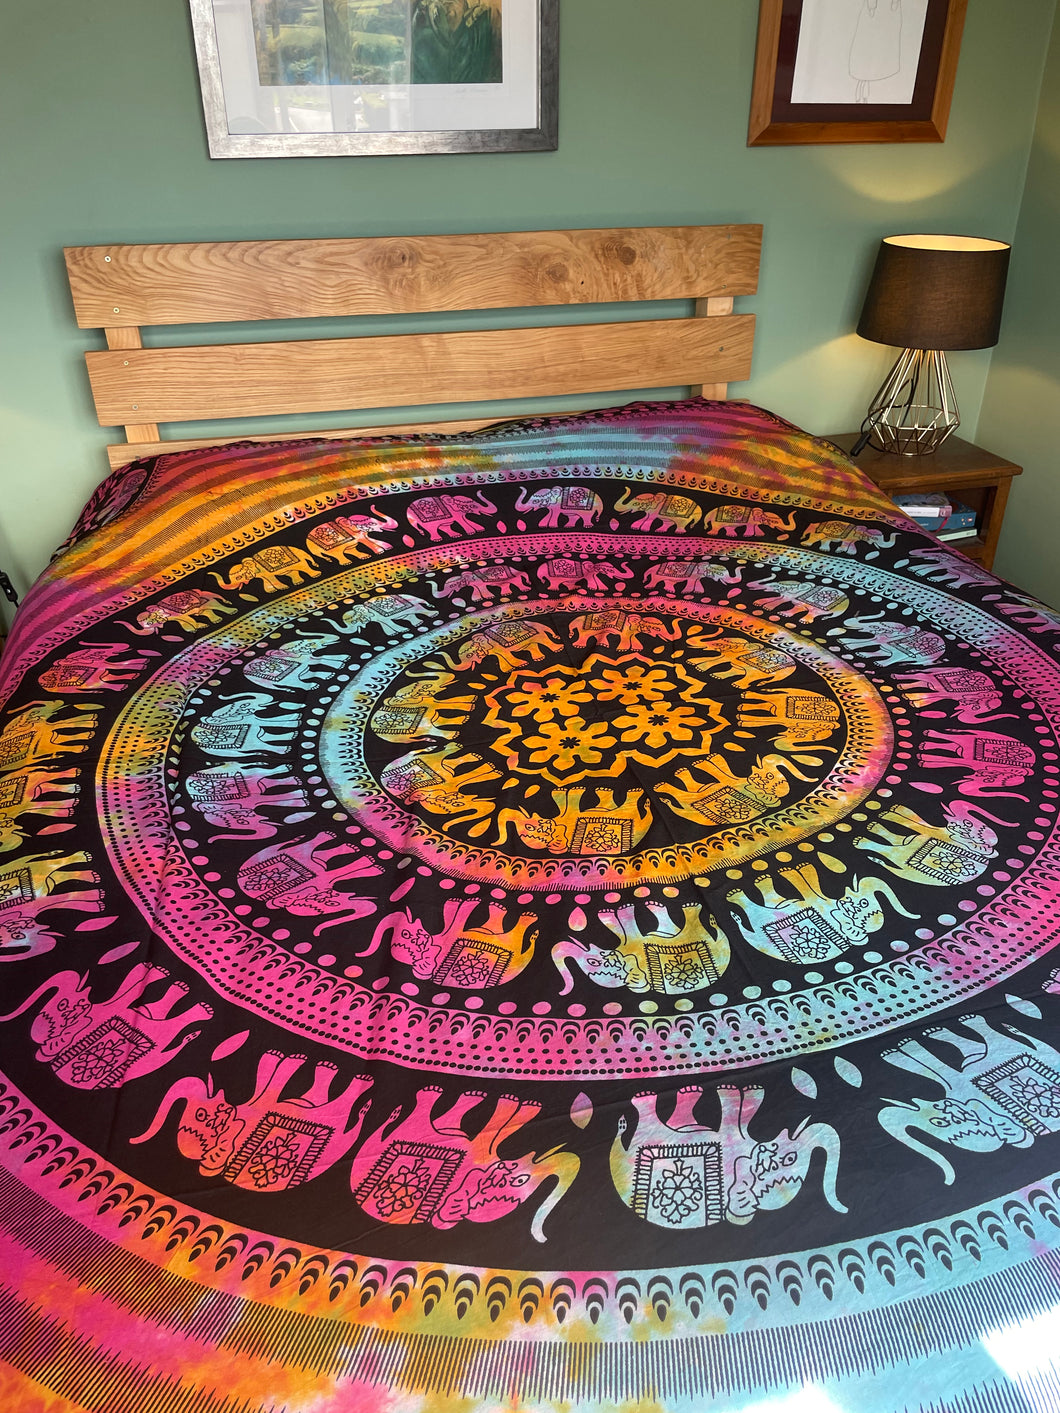 Buy now online from Emma's Emporium! Elephant tie dye double king size bed spread, hippy throw or wall hanging, from Emma's Emporium ethical fair-trade alternative hippy clothing and gifts.